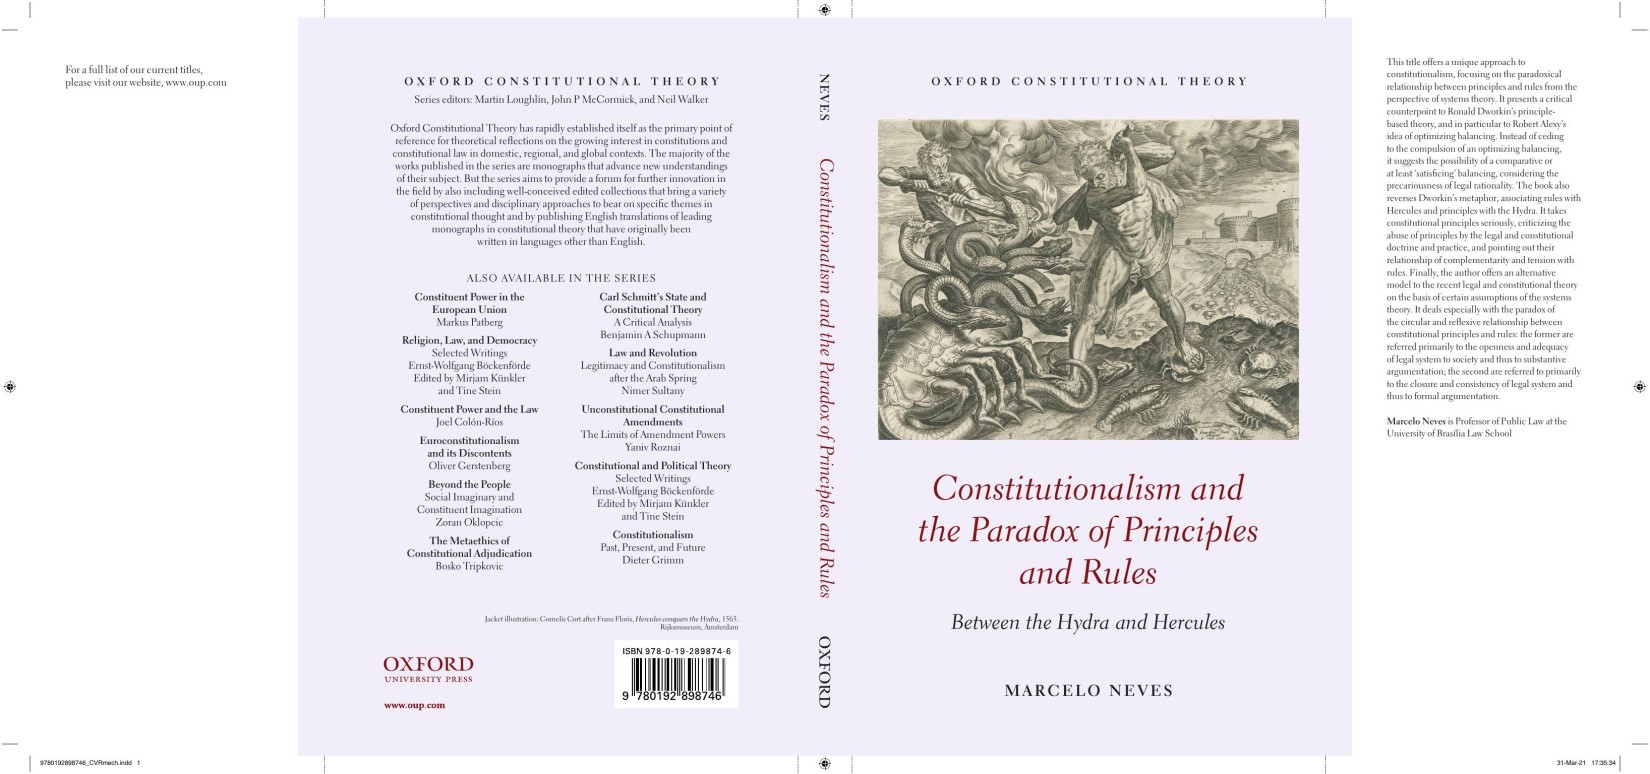 (eBook PDF)Constitutionalism and the Paradox of Principles and Rules: Between the Hydra and Hercules by Marcelo Neves